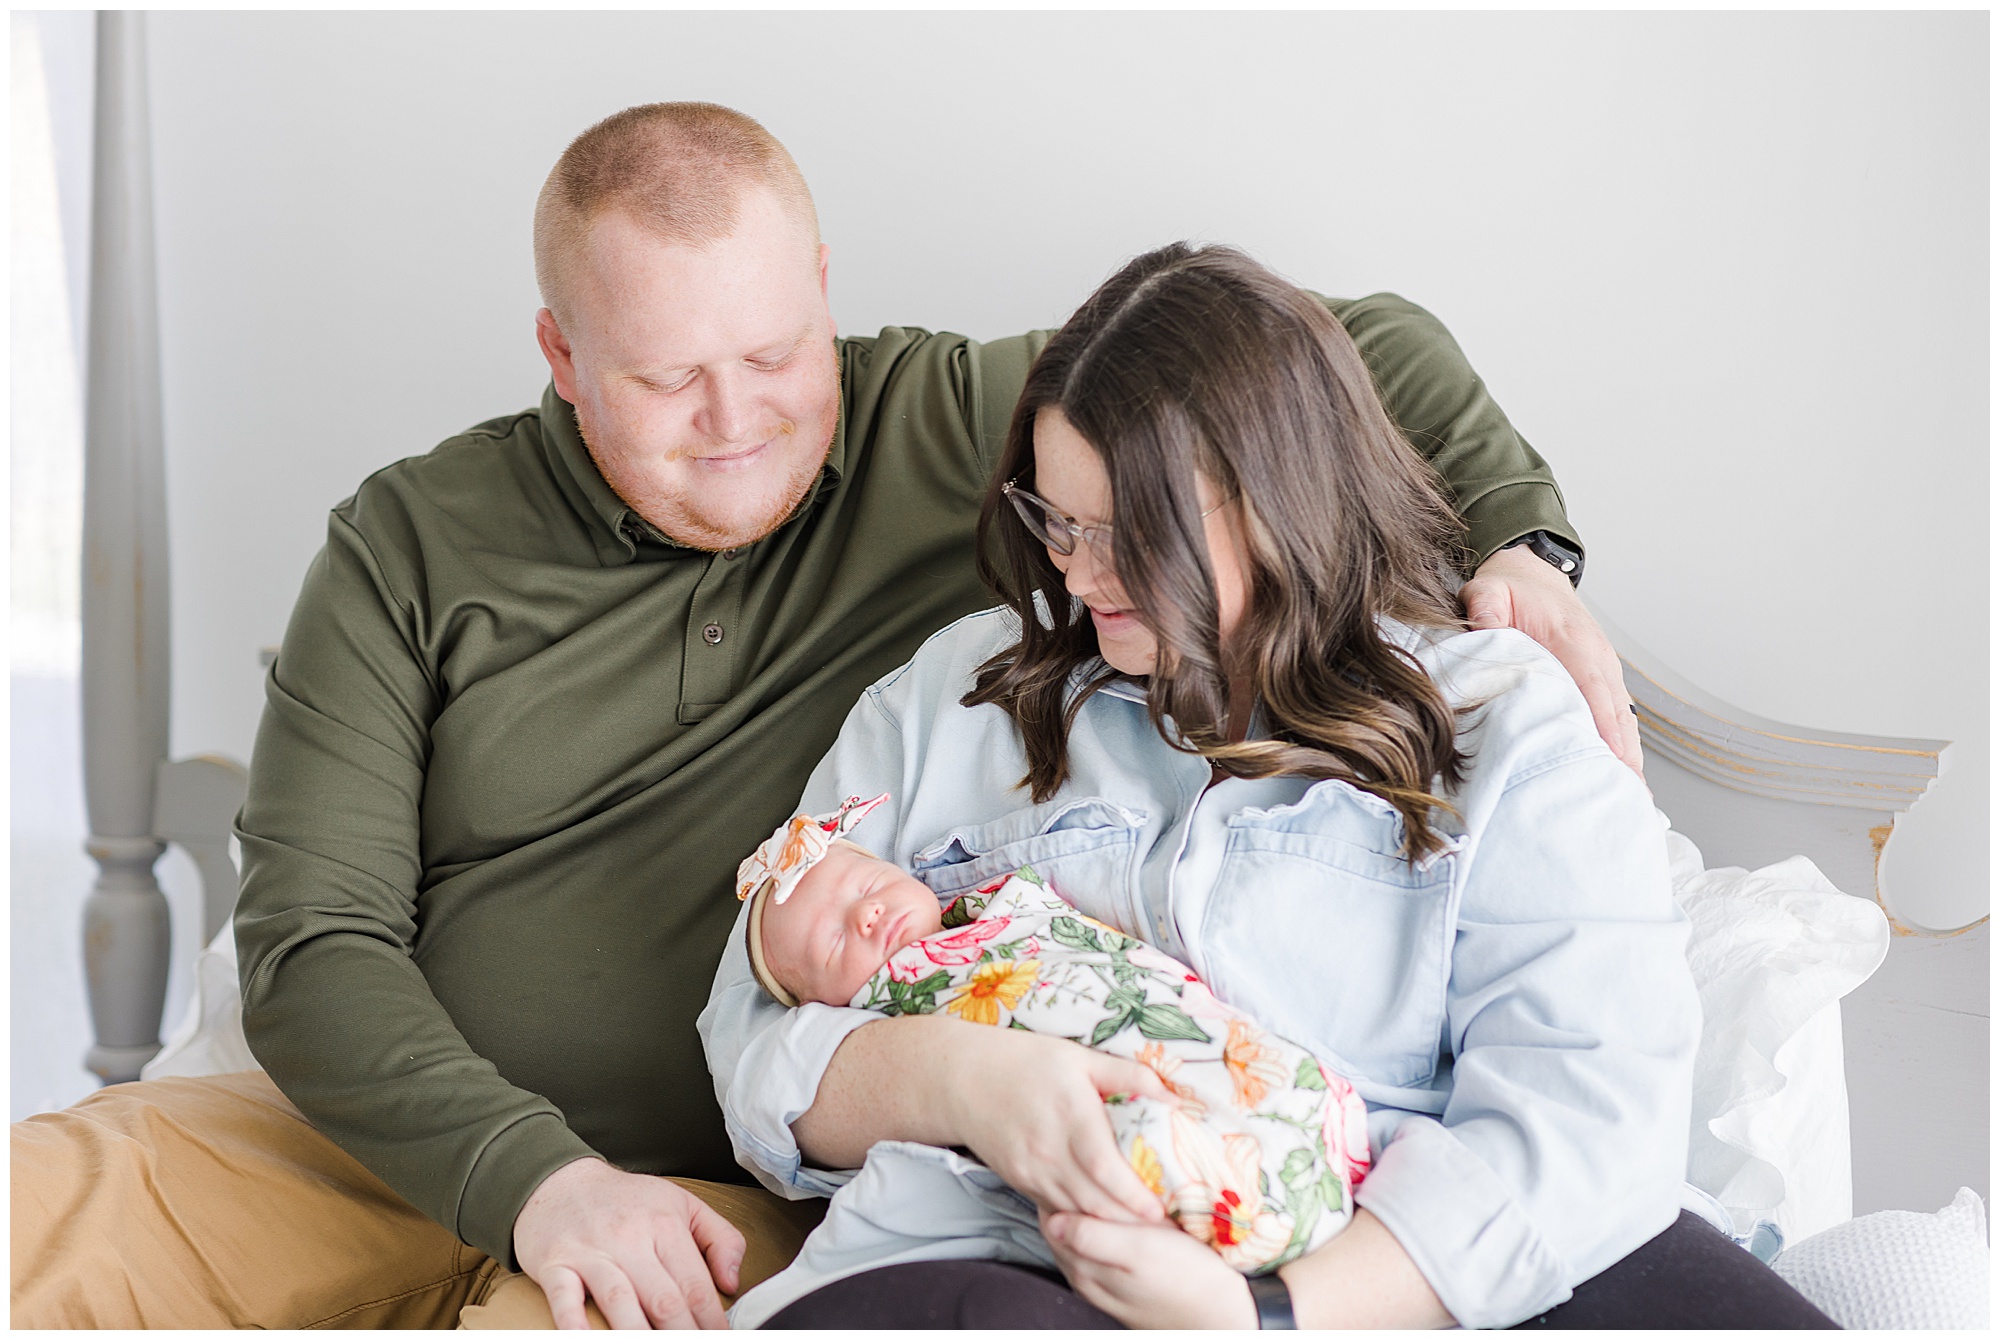 Dad in dark green shirt and mom in light blue shirt hold sweet newborn daughter in colorful floral swaddle during Behind the Lens session. 